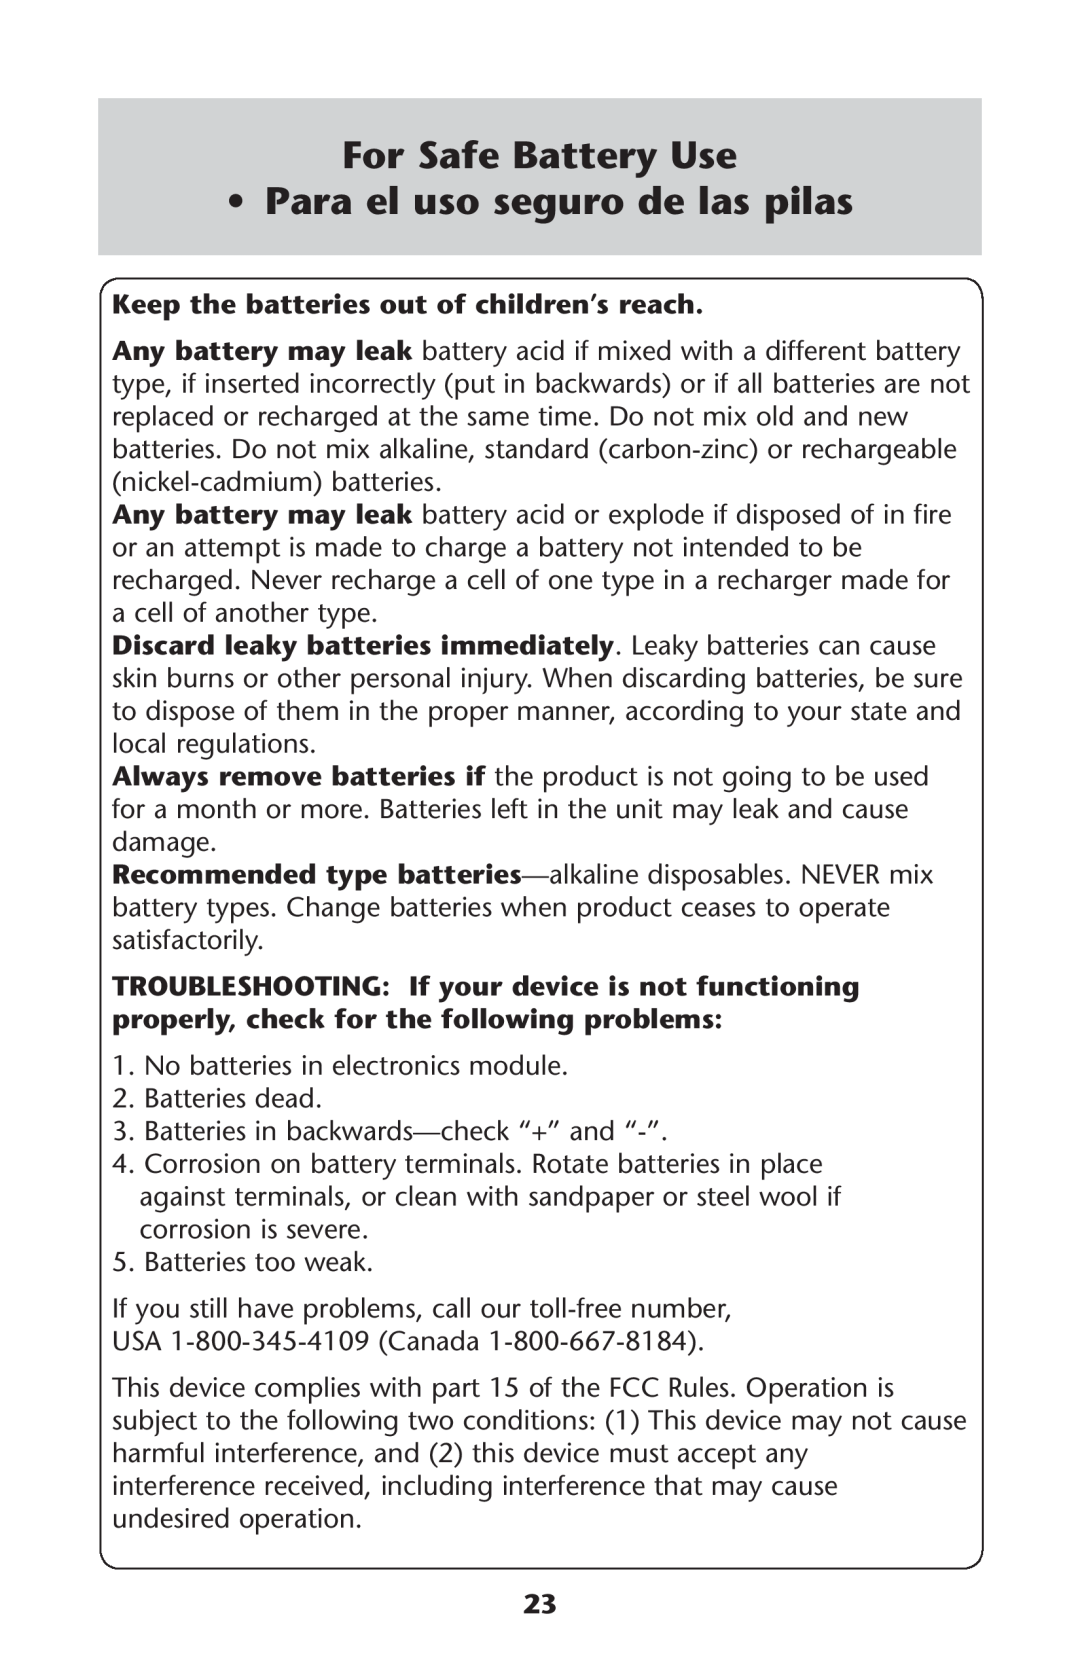 Graco PD187207A 9/11 For Safe Battery Use ss 0ARA EL USOSSEGURO DE LASAPILAS, Keep the batteries out of children’s reach 